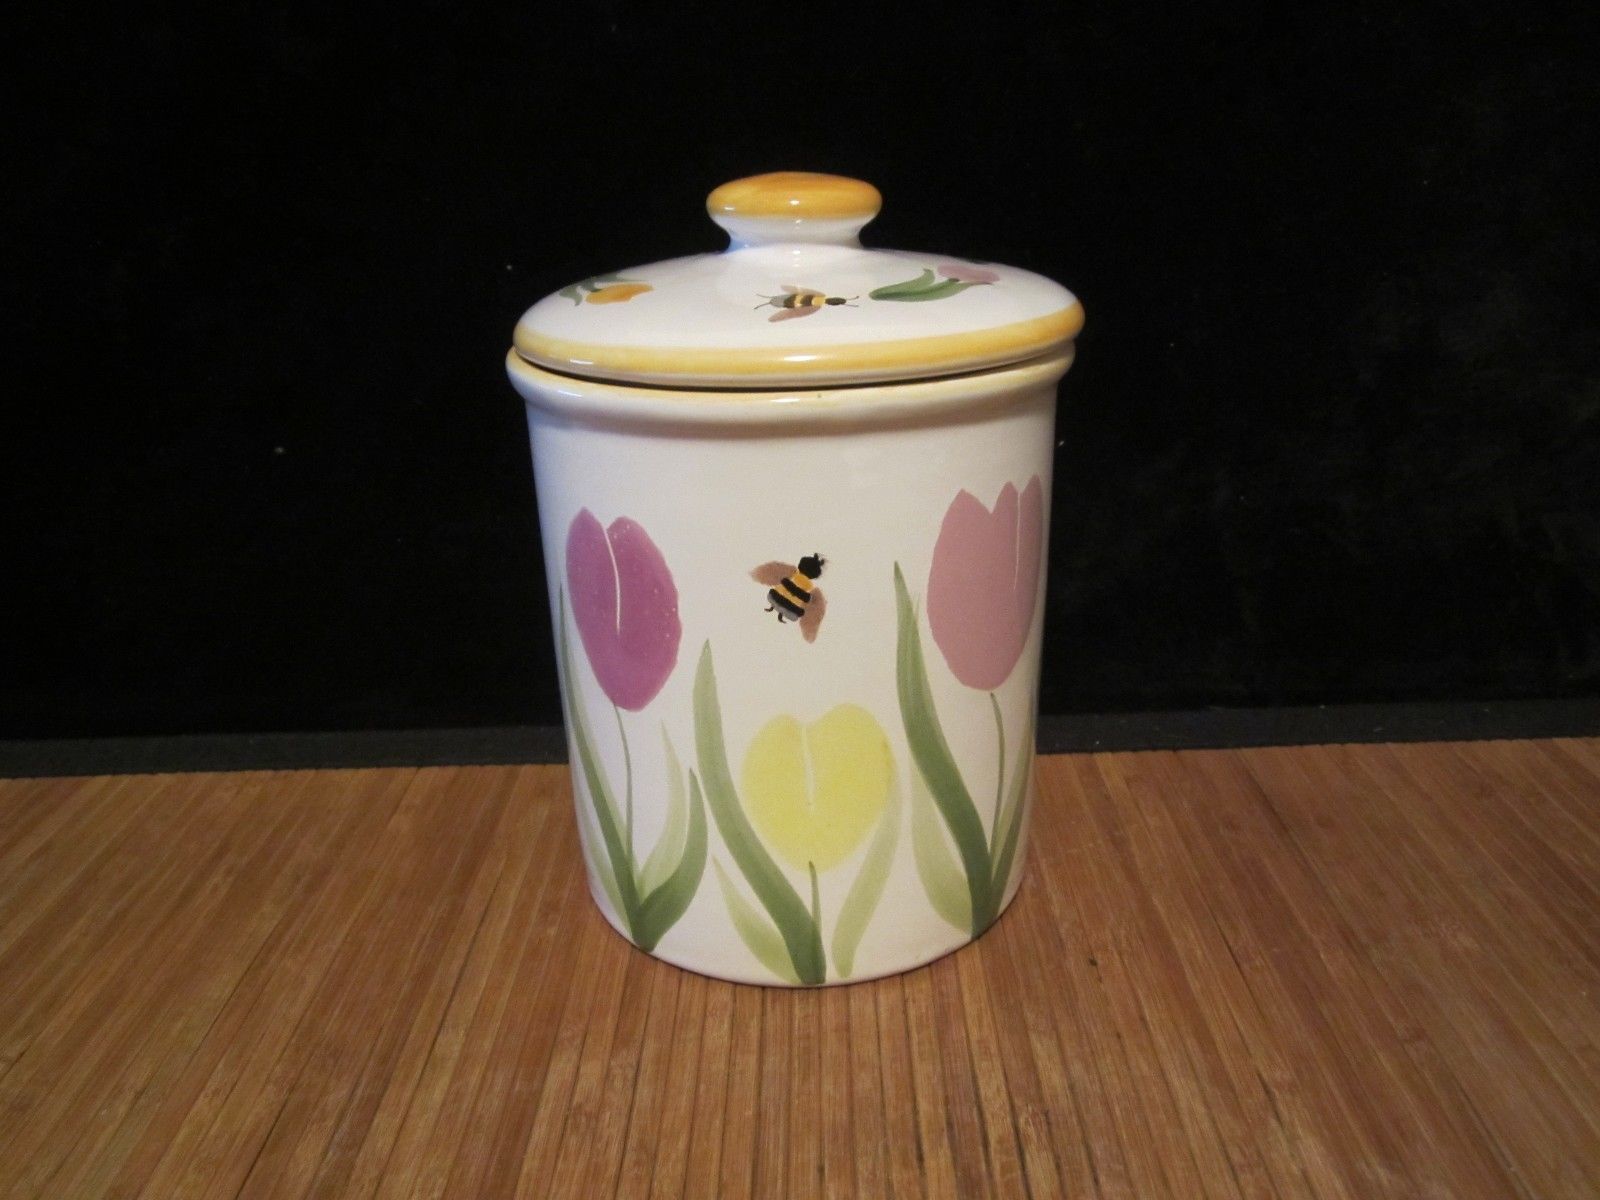 Primary image for Starbucks Pottery Ceramic White with Tulips and Bees Hand Painted from Hungry